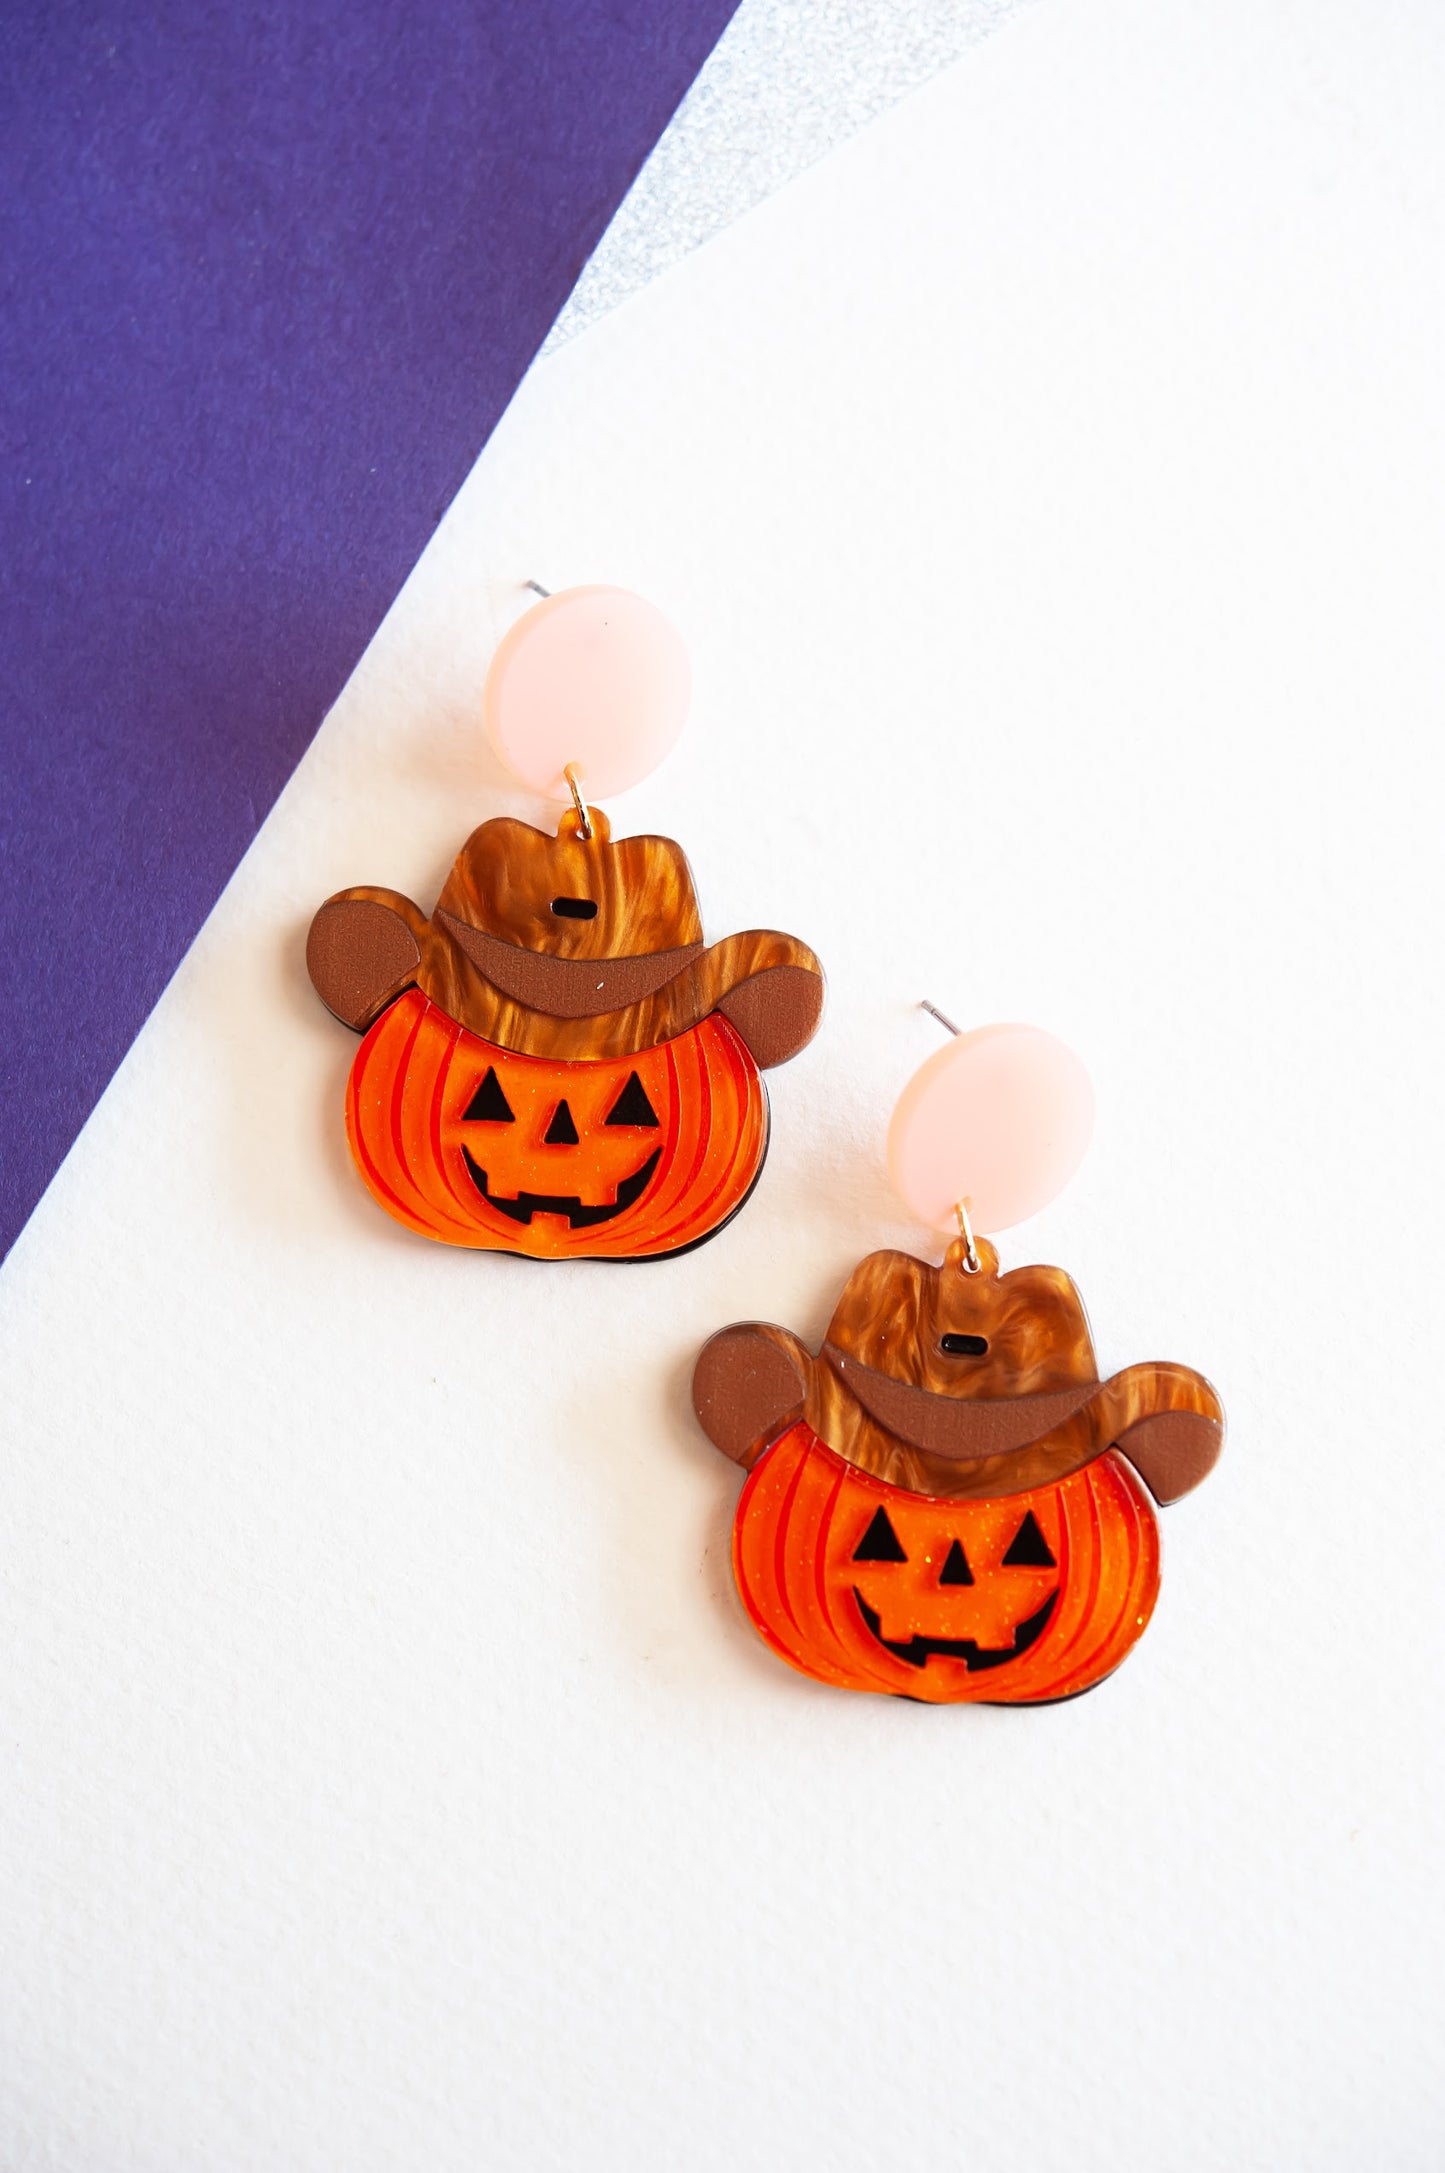 Halloween DIY: FIMO Clay Spider Ring and Pumpkin Earrings